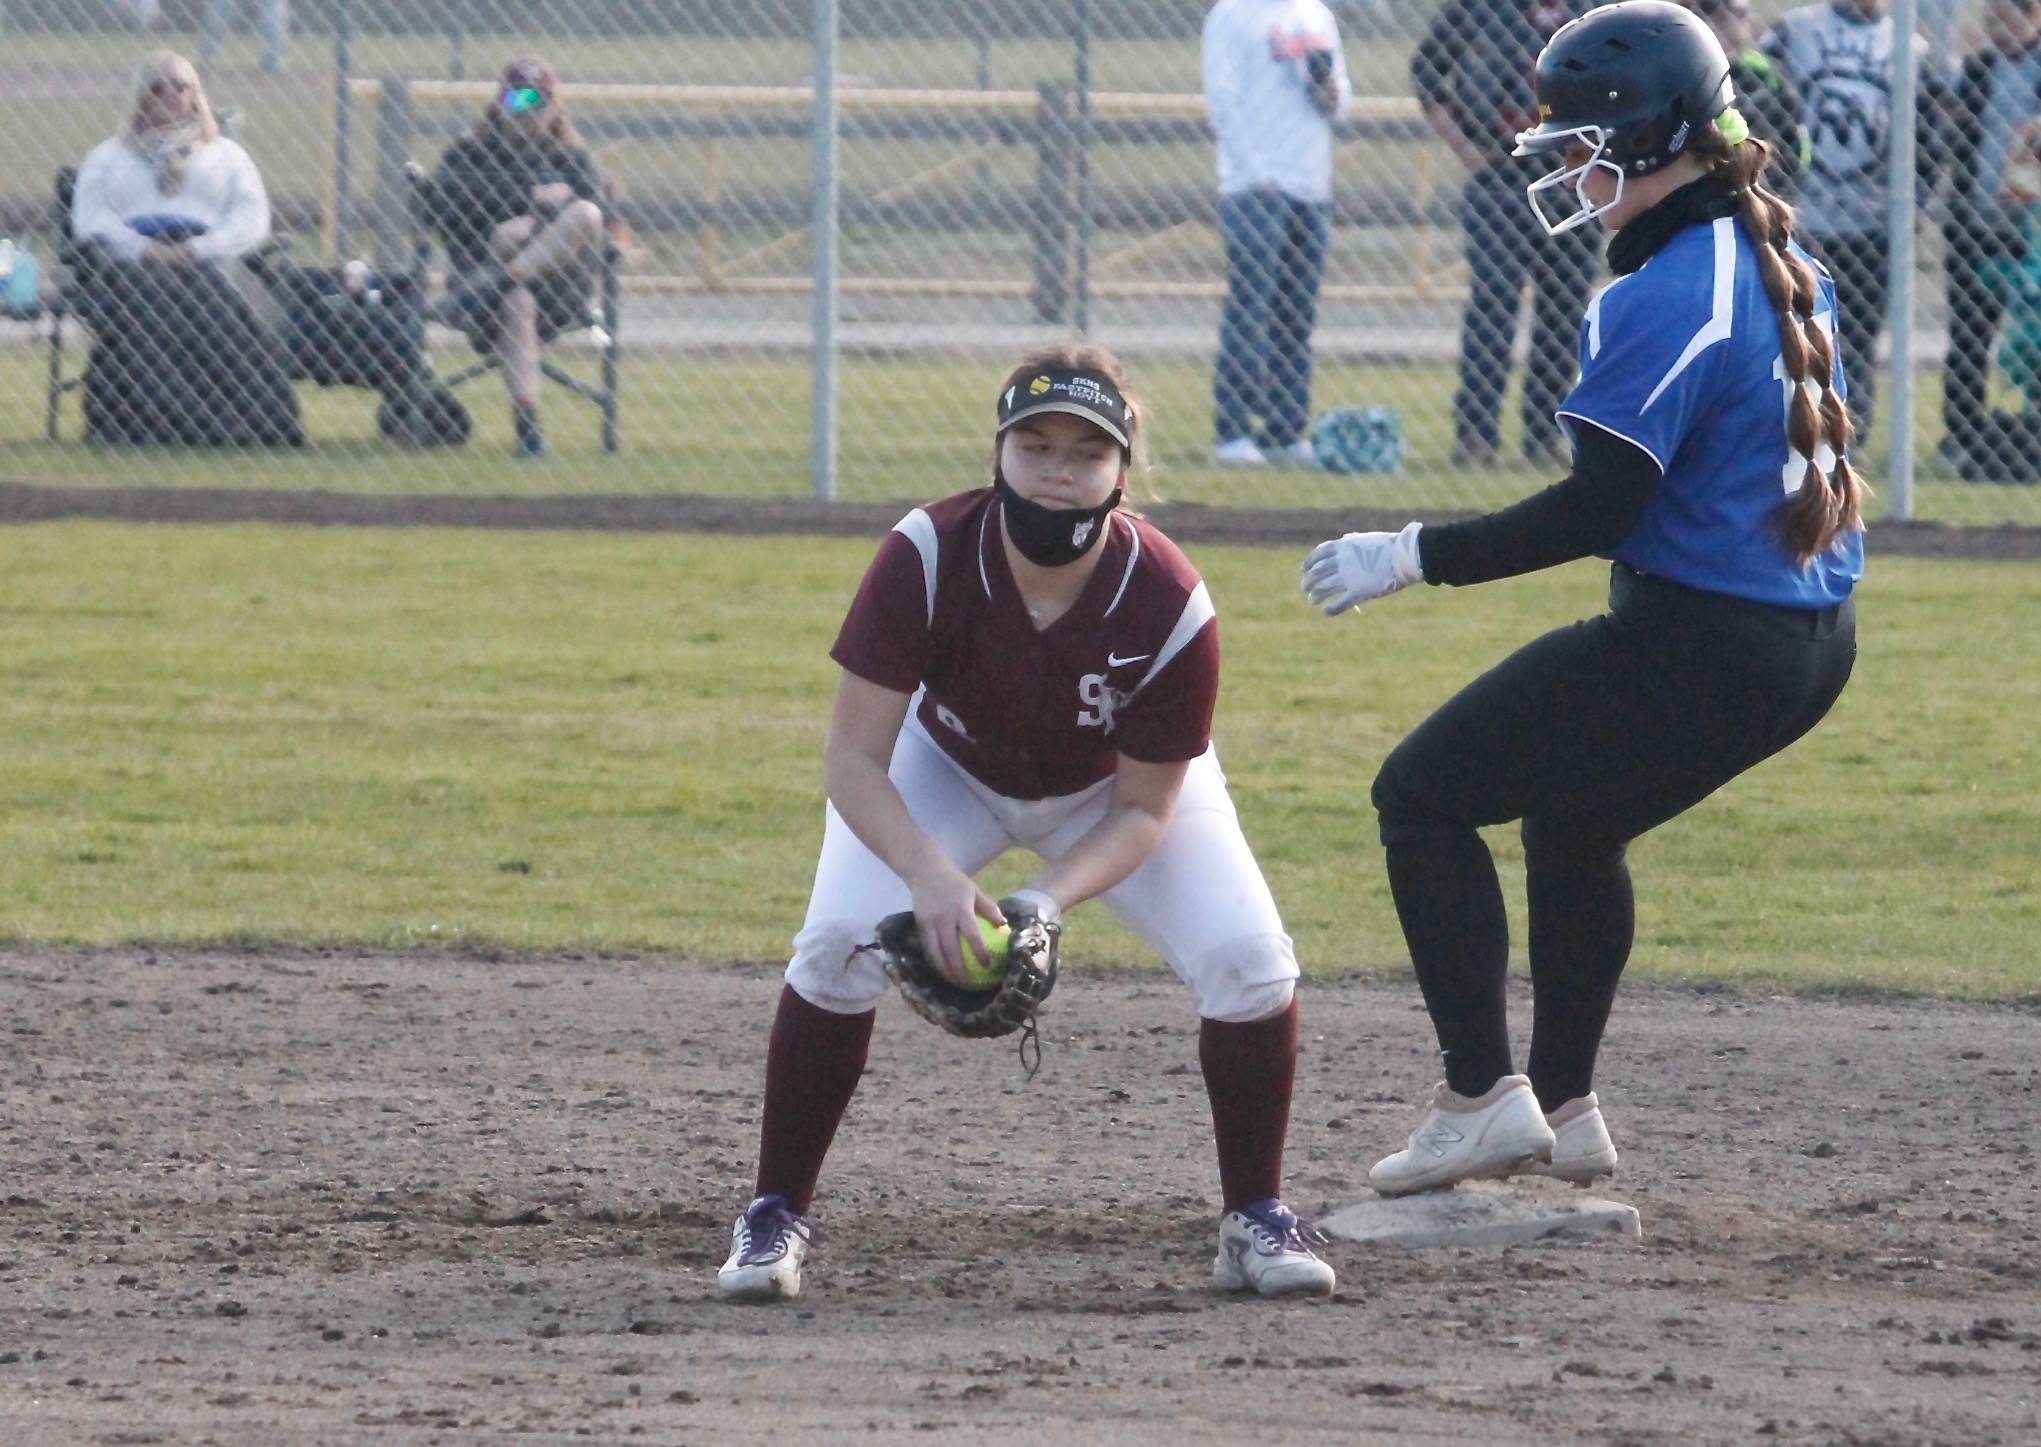 Shortstop Sarah Hoyt gets in front of a throw during a steal attempt. (Mark Krulish/Kitsap News Group)